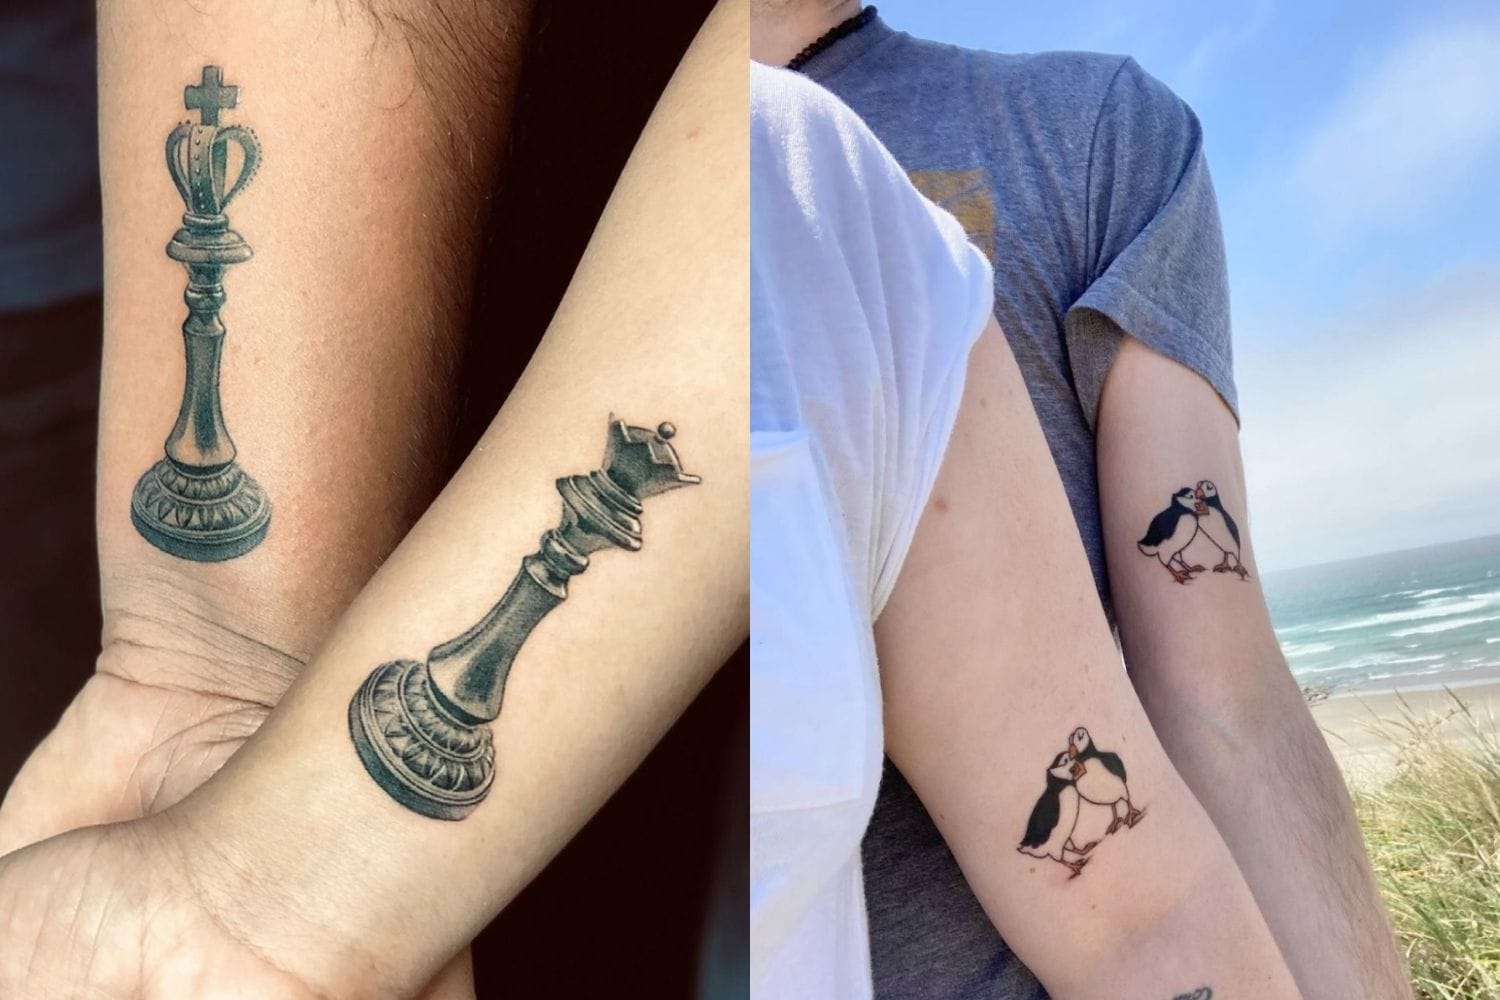 10 matching tattoo ideas for couples